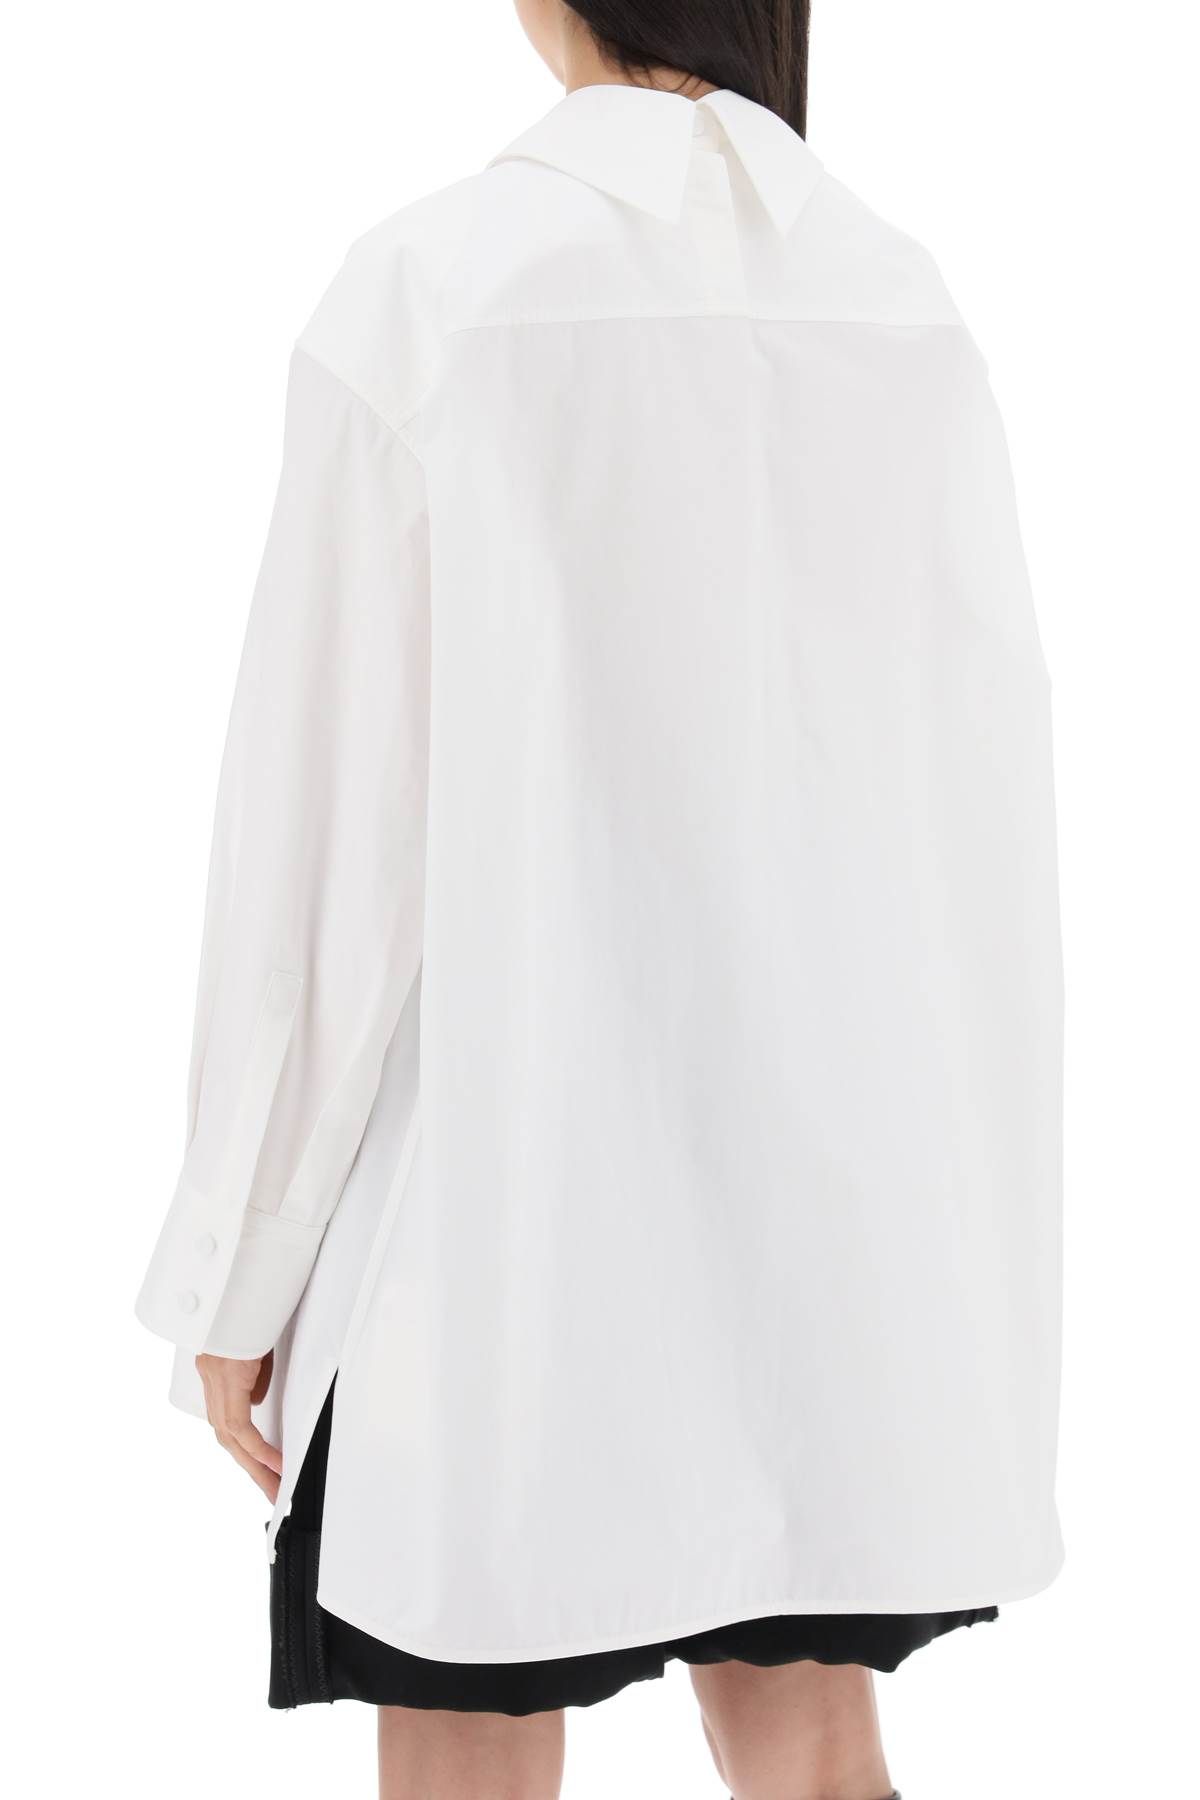 Shop Jil Sander "oversized Shirt With Double In White